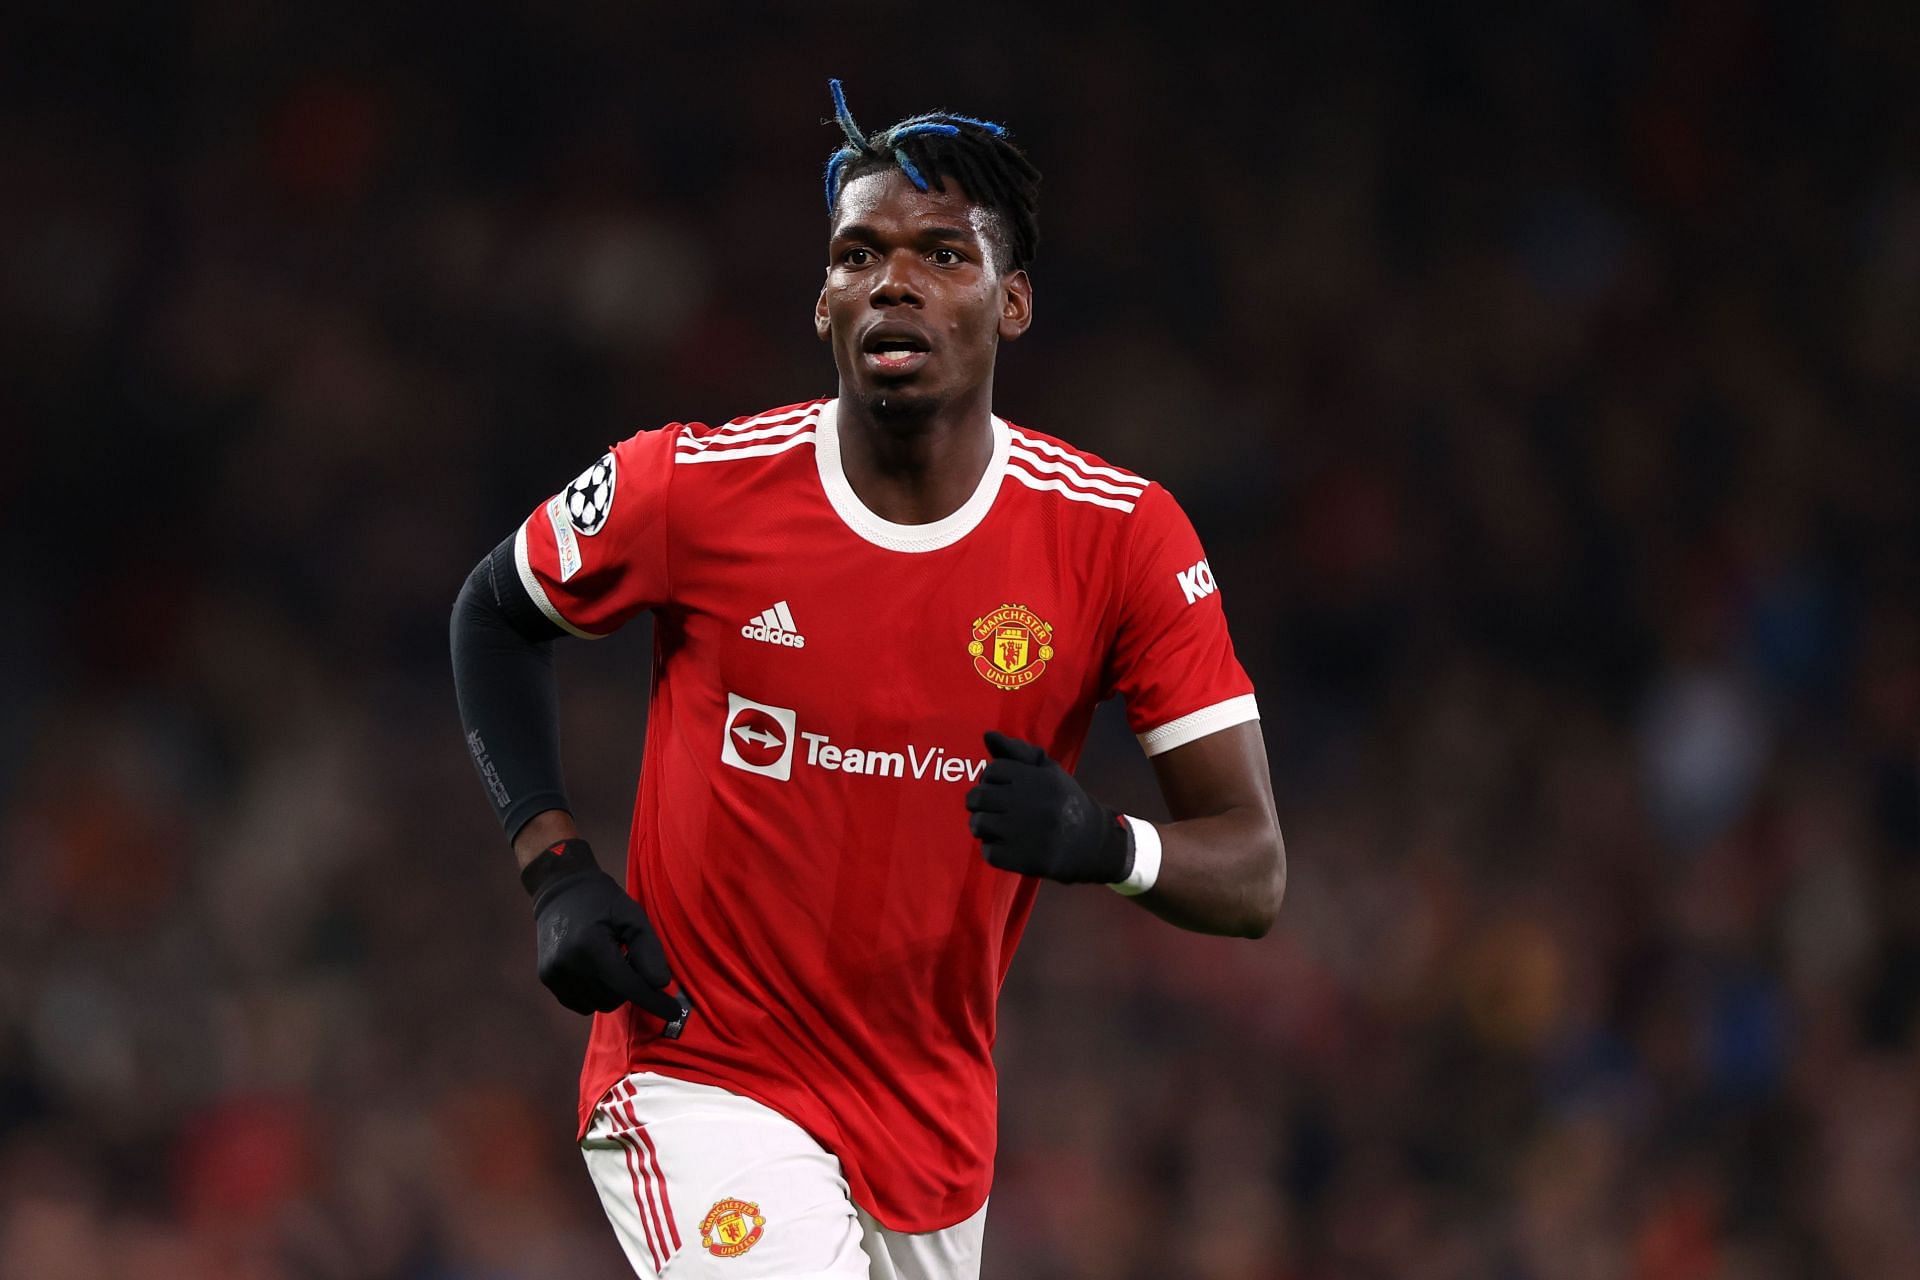 Pogba is yet to sign a contract extension